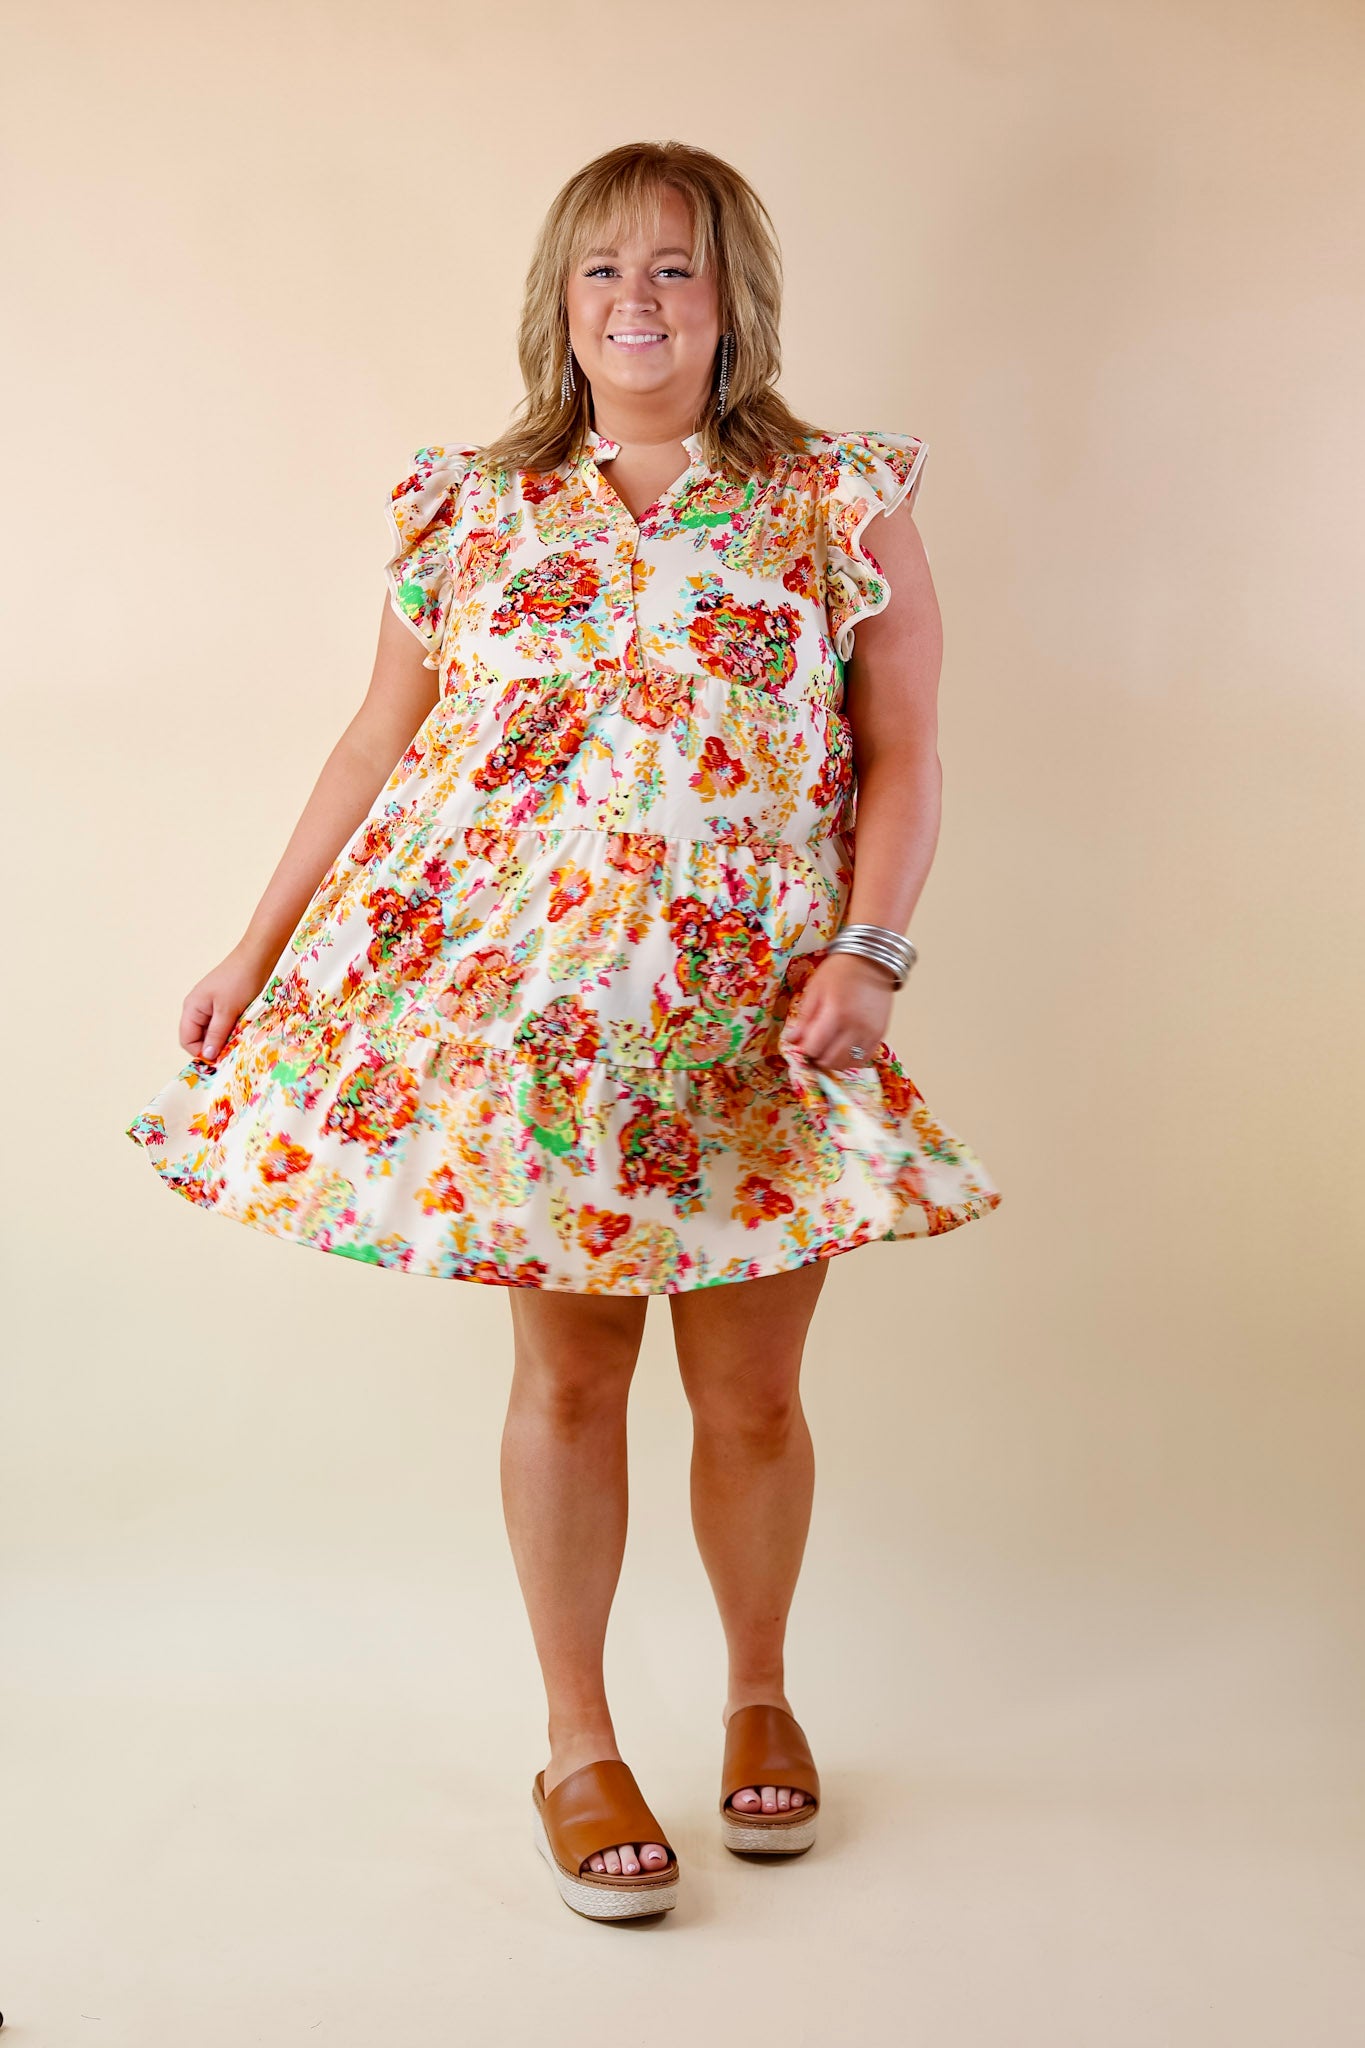 Best Route Floral Ruffle Cap Sleeve Dress in Cream - Giddy Up Glamour Boutique